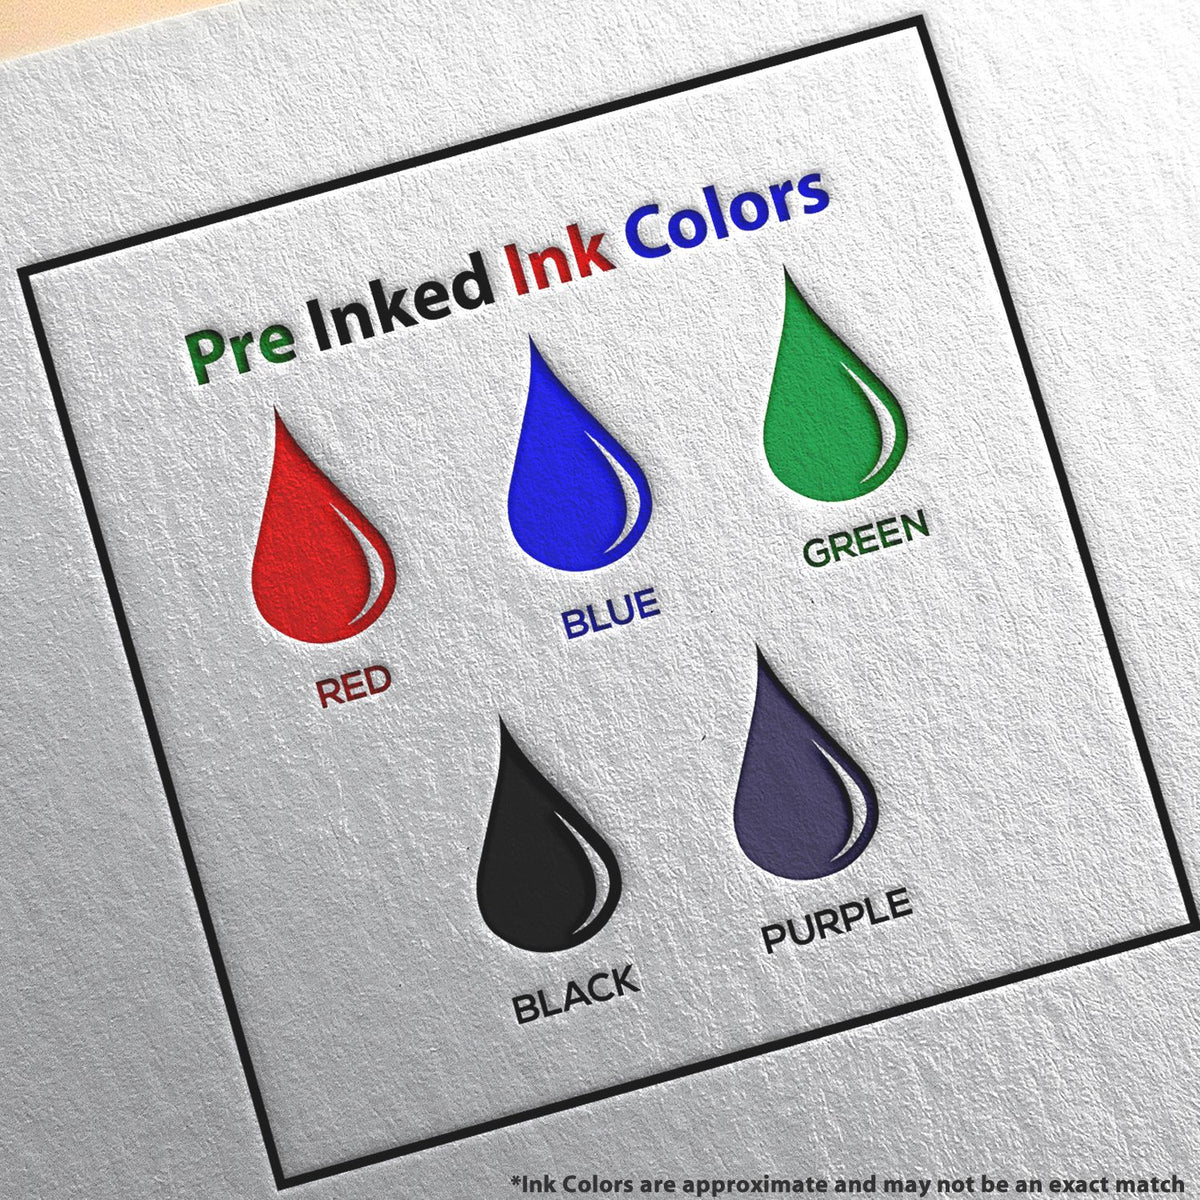 A picture showing the different ink colors or hues available for the Slim Pre-Inked Wisconsin Architect Seal Stamp product.